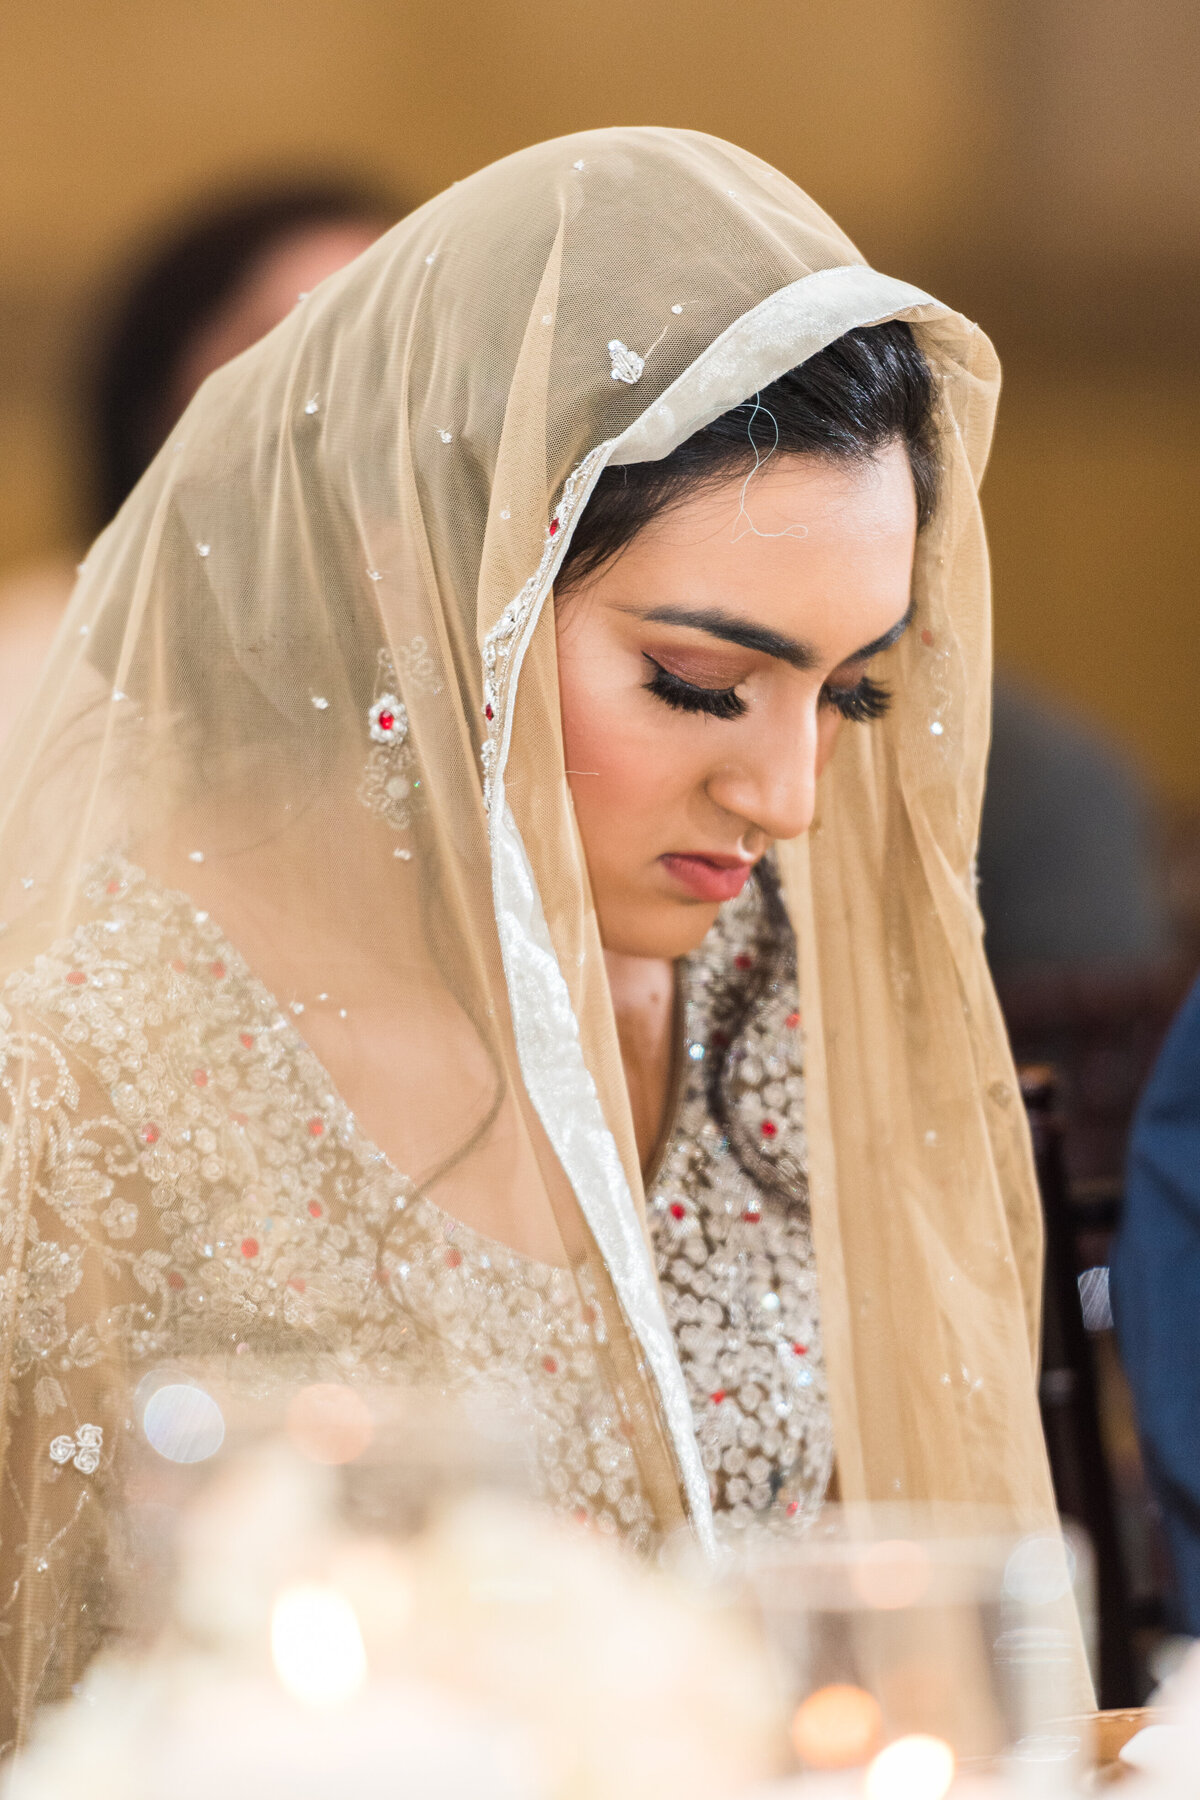 maha_studios_wedding_photography_chicago_new_york_california_sophisticated_and_vibrant_photography_honoring_modern_south_asian_and_multicultural_weddings23